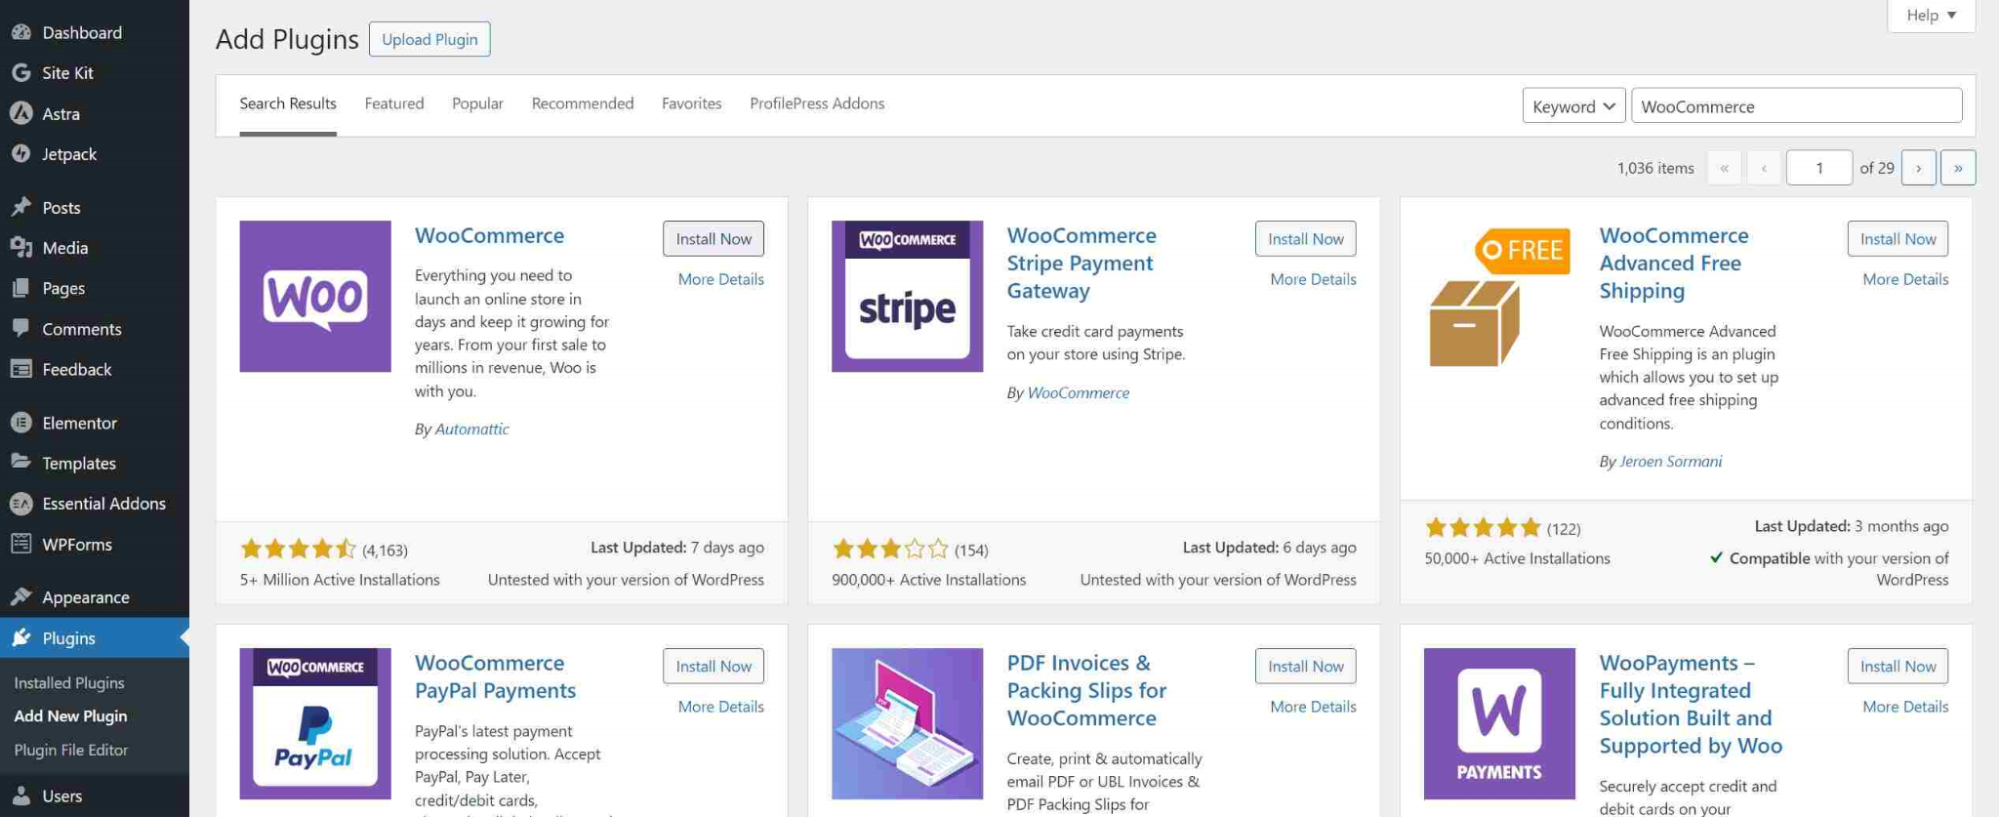 Screenshot of the WooCommerce plugin on the Add Plugins page on the WordPress dashboard